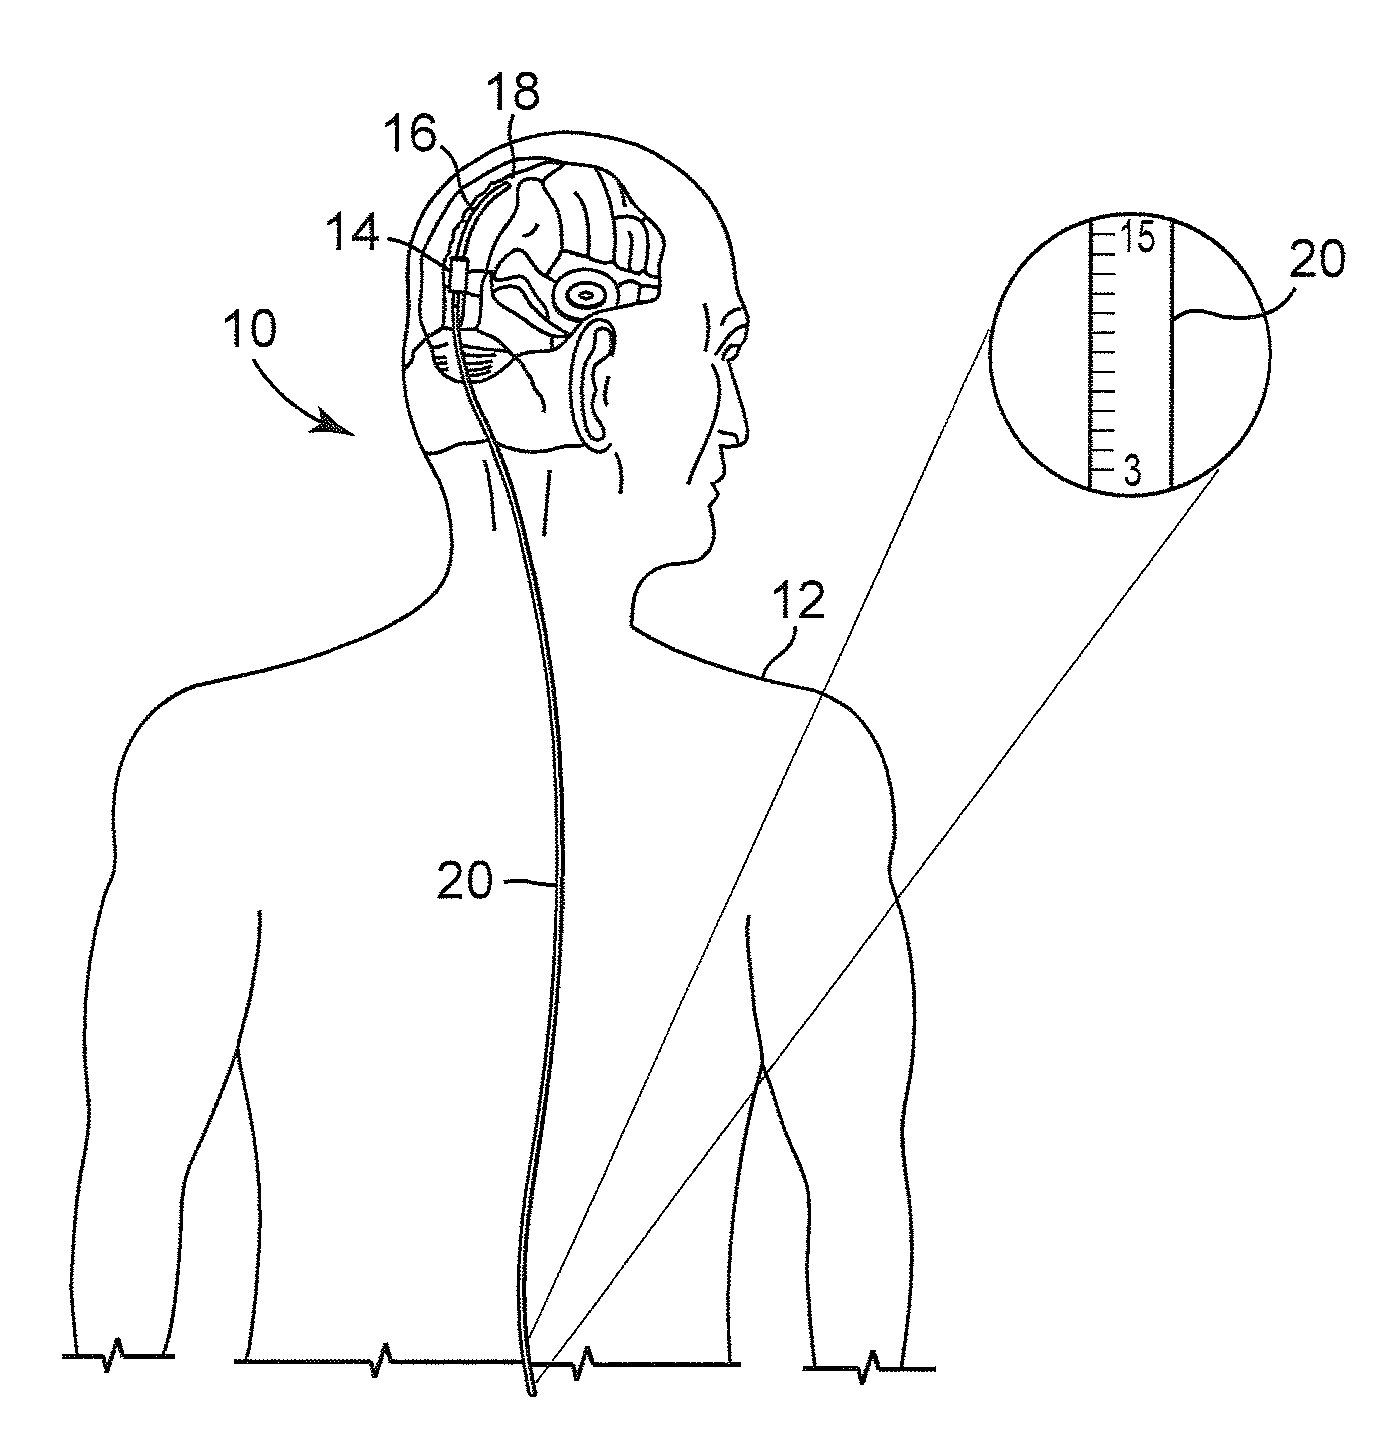 Implantable cerebrospinal fluid flow device and method of controlling flow of cerebrospinal fluid